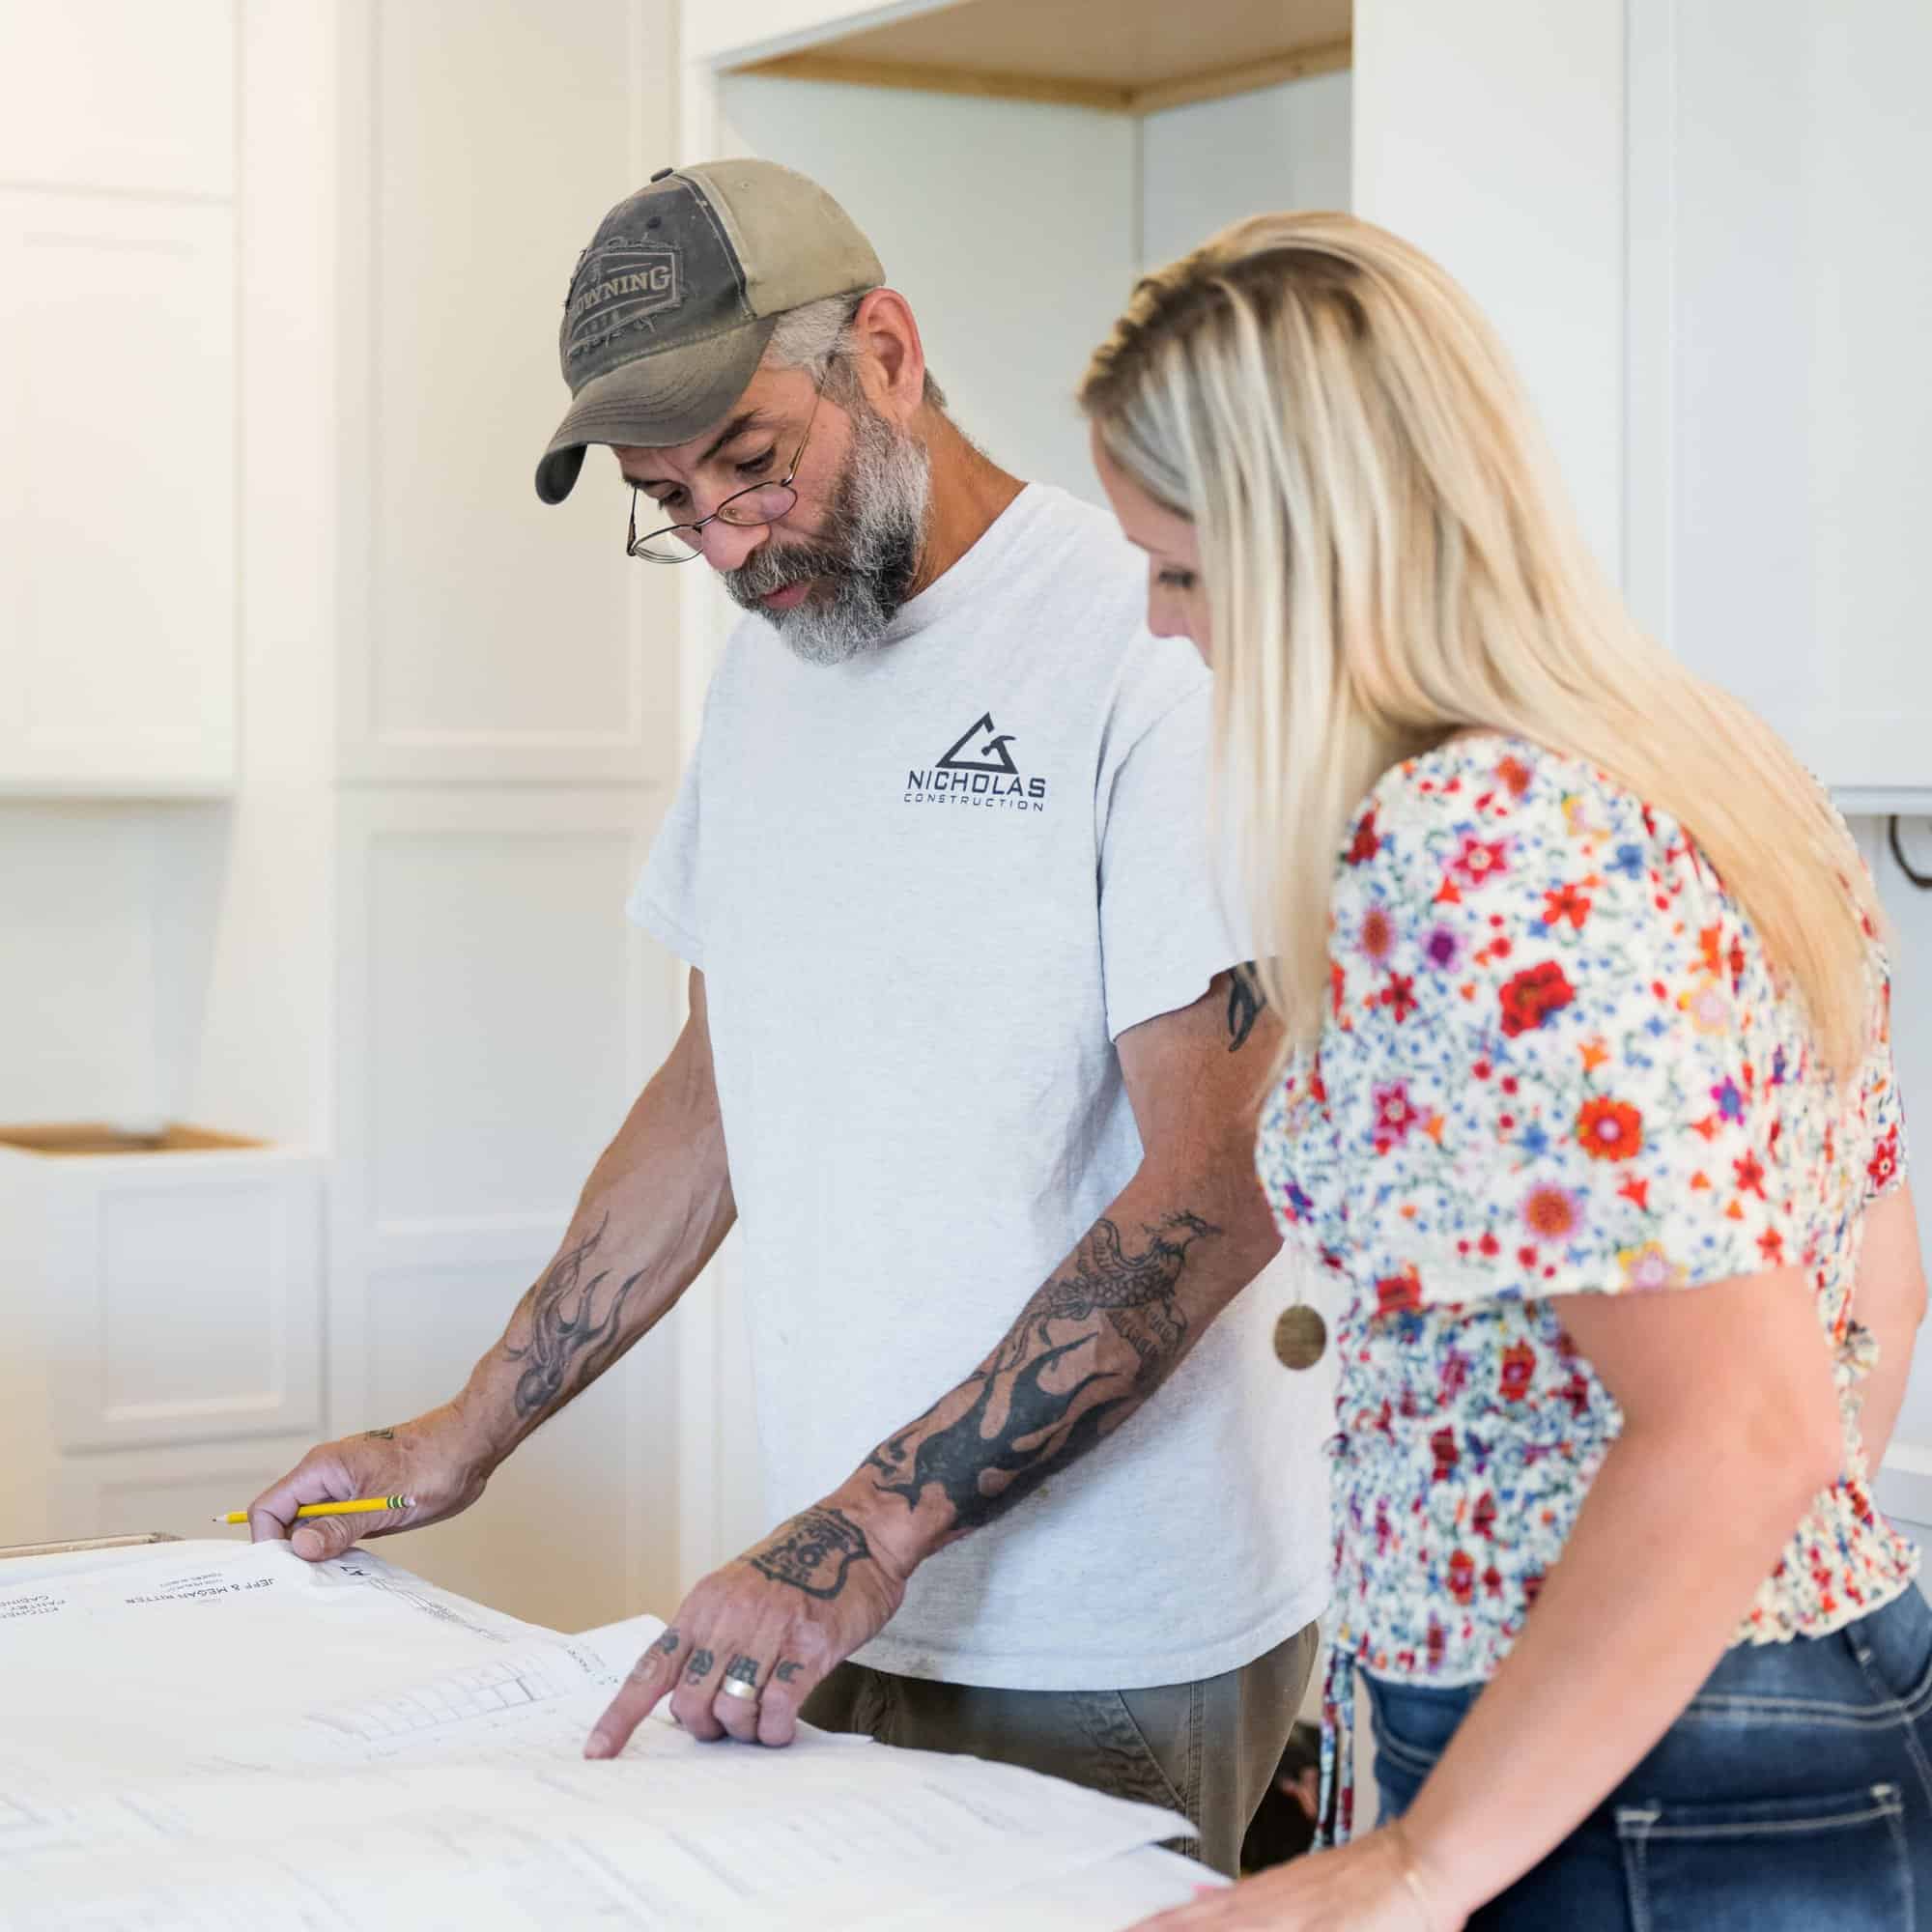 Nicholas Design Build | A man and woman looking at blueprints in a kitchen.